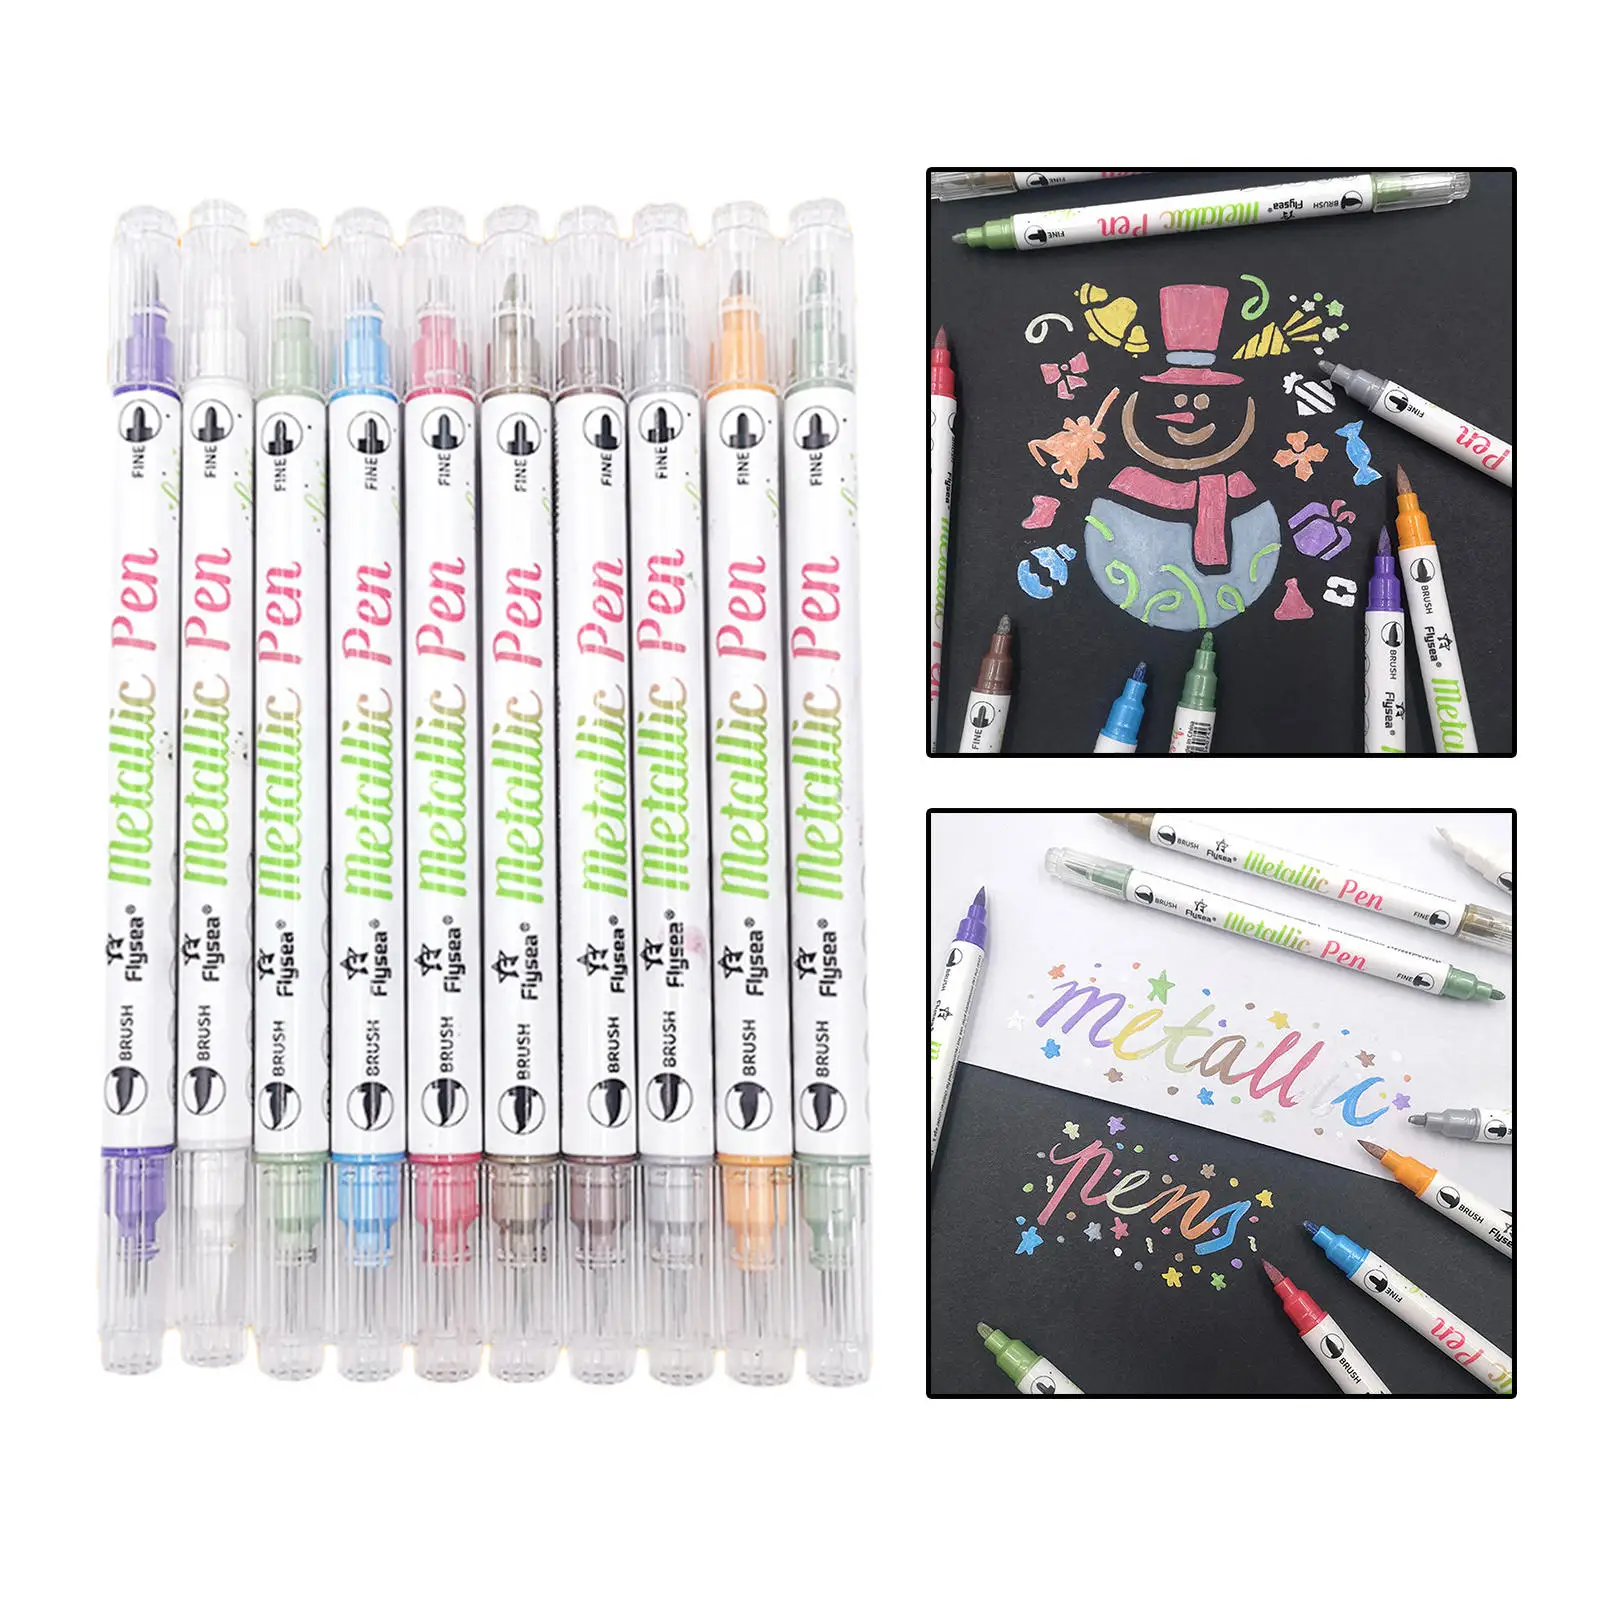 10 Colors Double Head Metallic Paint Pens Markers Writing Doodle Pens for